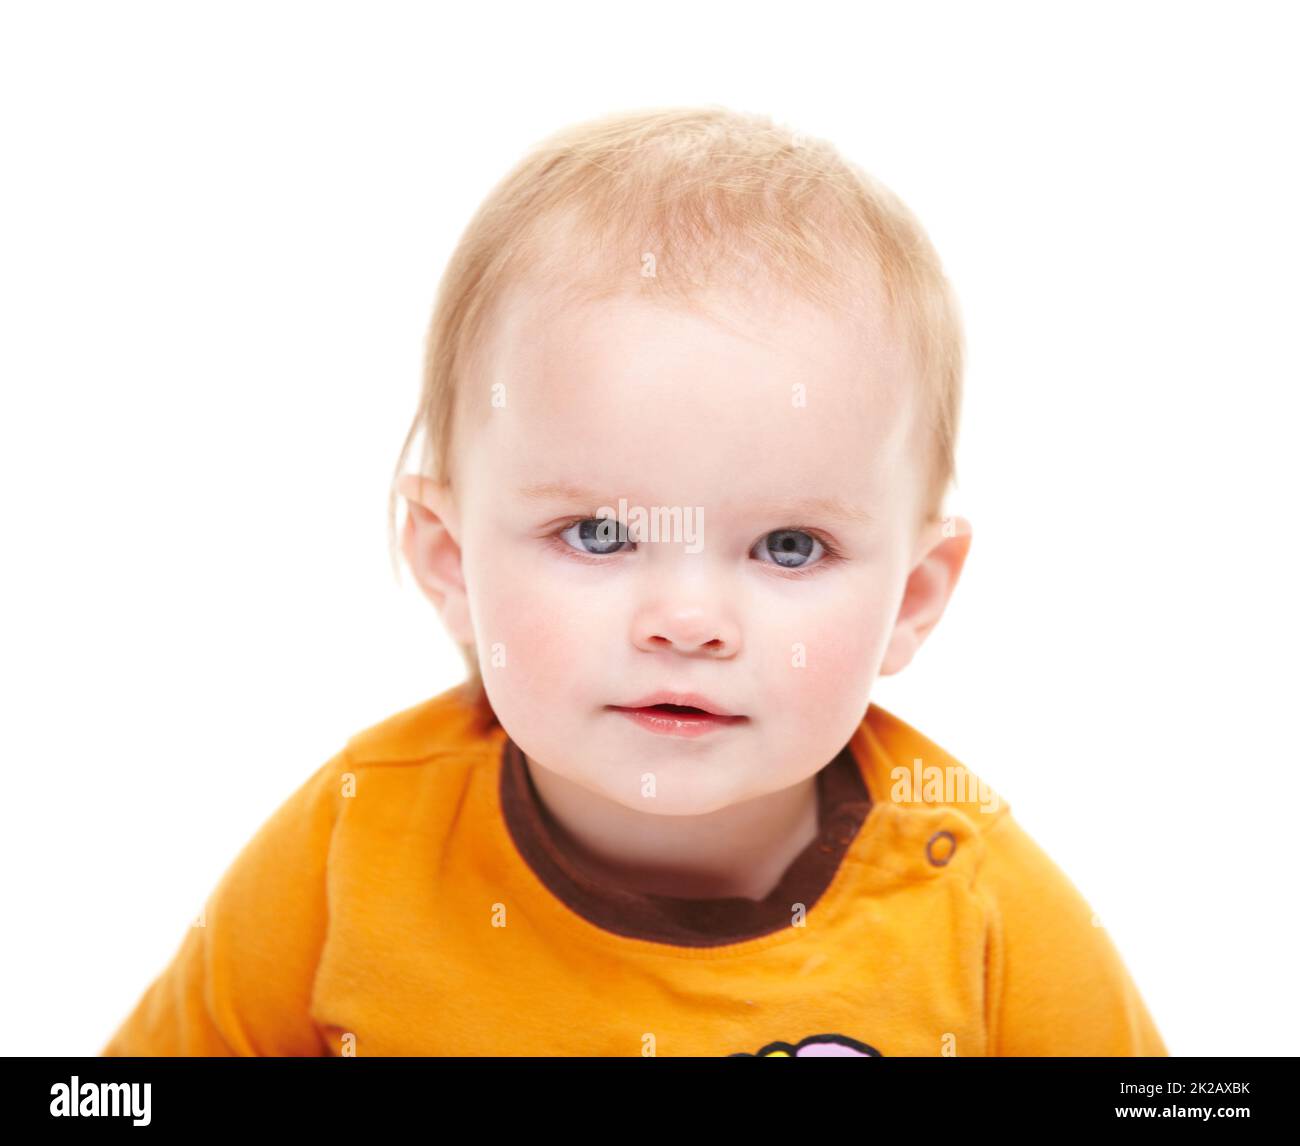 The picture of innocence. Portrait of a cute baby girl looking at the camera against a white background. Stock Photo